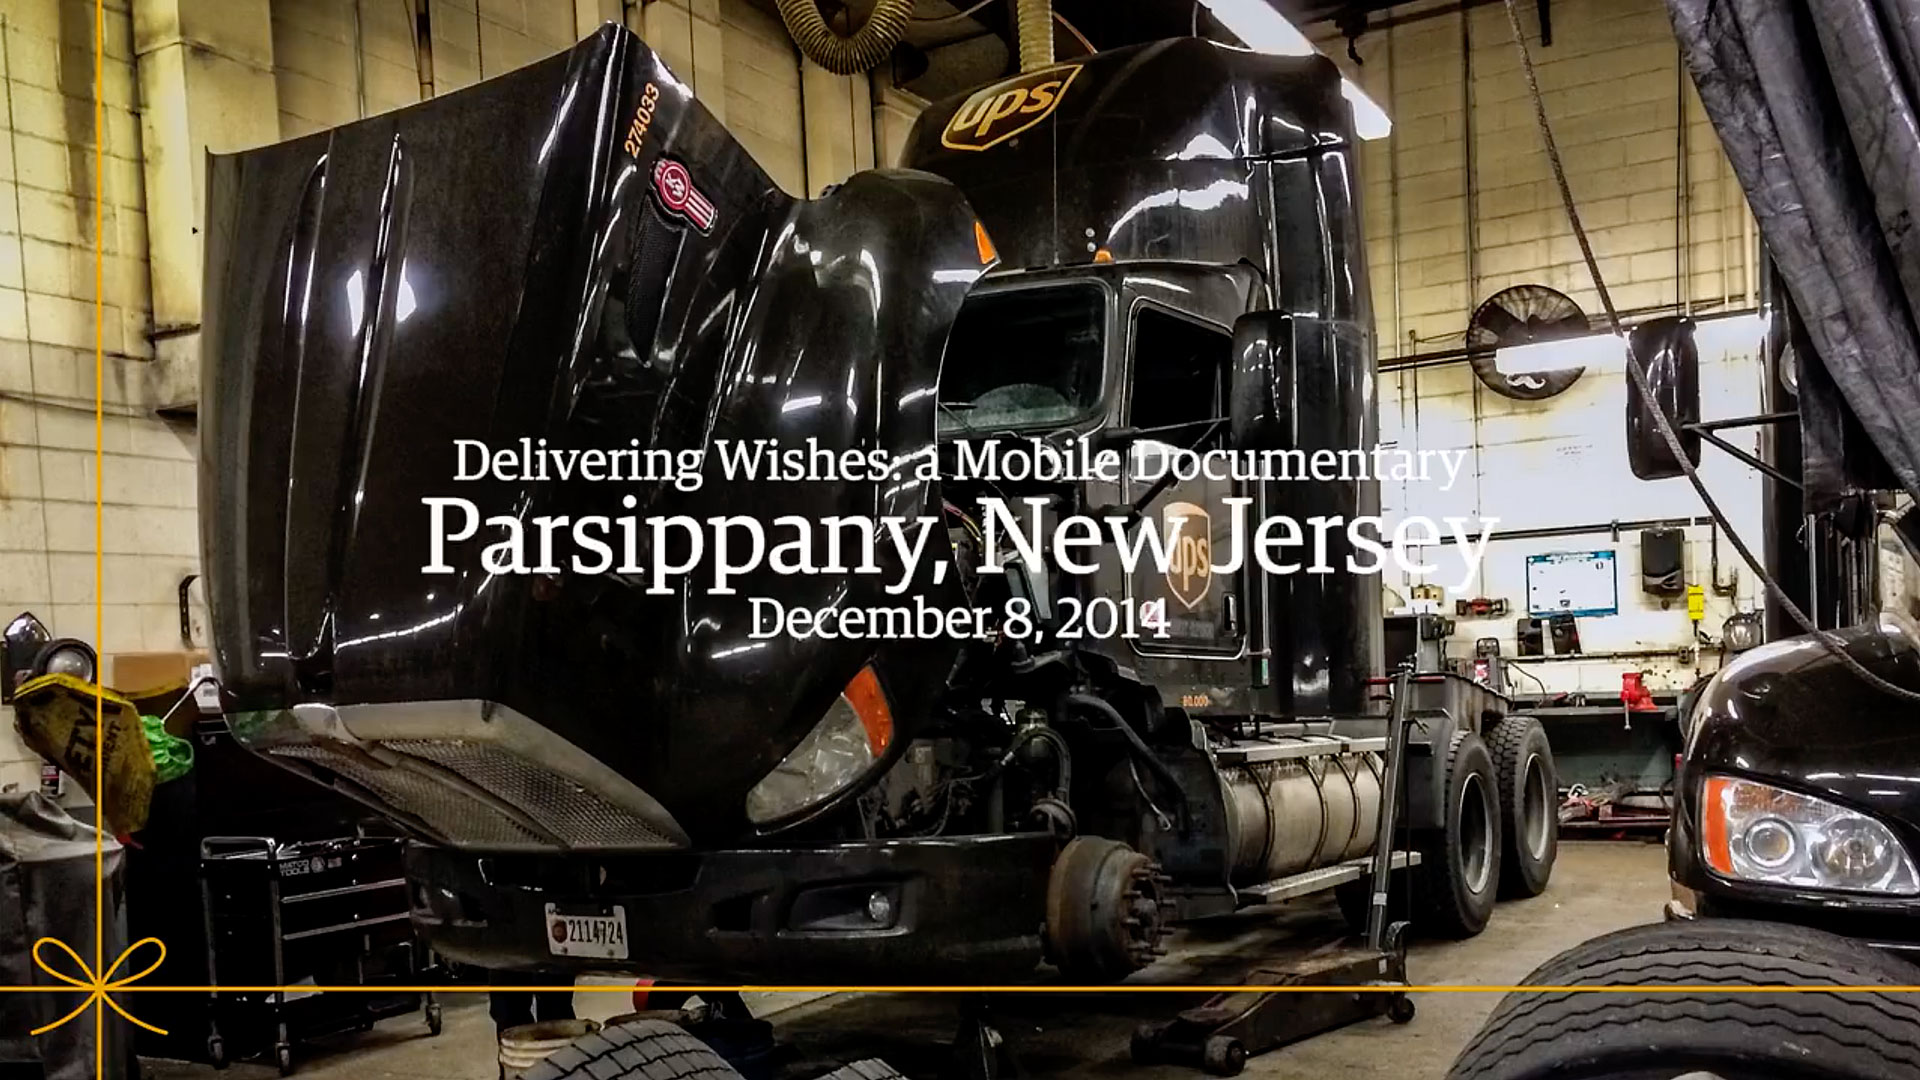 UPS-Delivering-Wishes-Parsippany-NJ